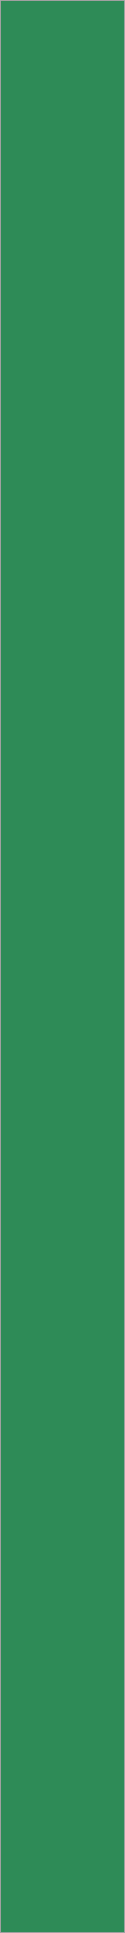 Home page graphic element green line